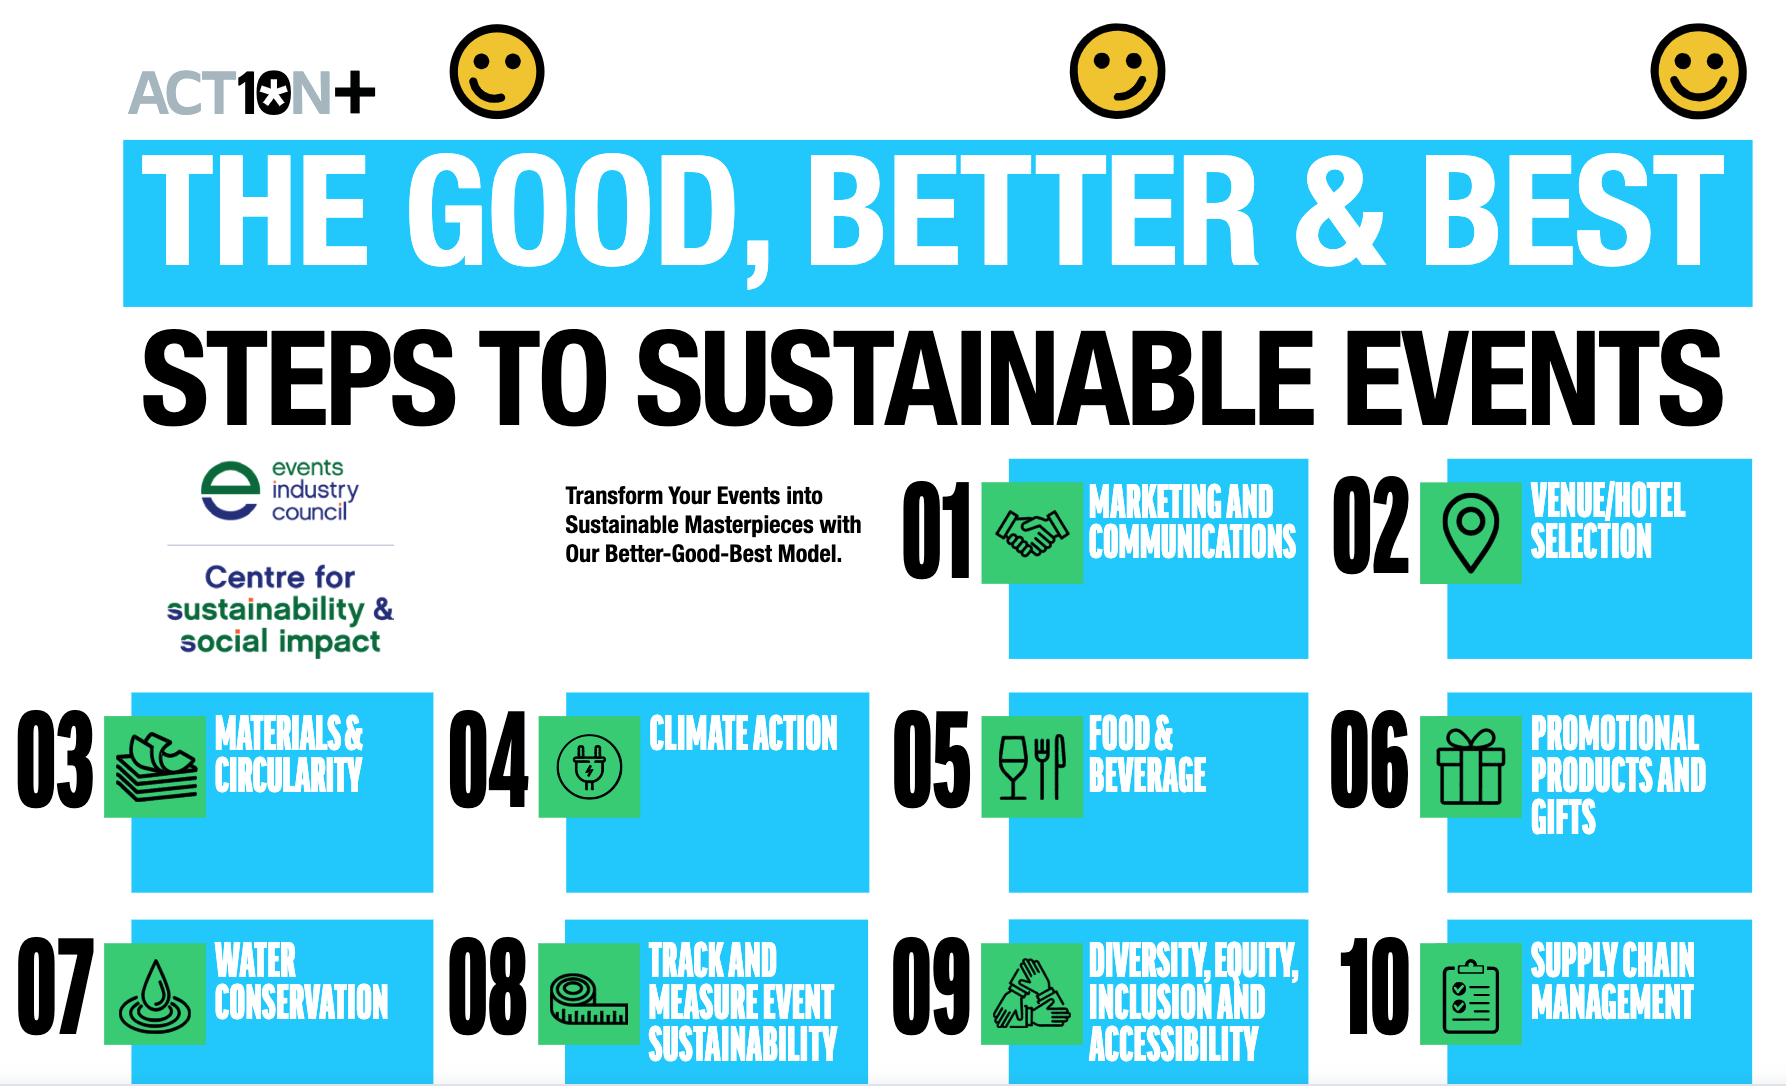 ACTION 10+ SUSTAINABILITY IN EVENTS - IT TAKES ONE SMALL STEP